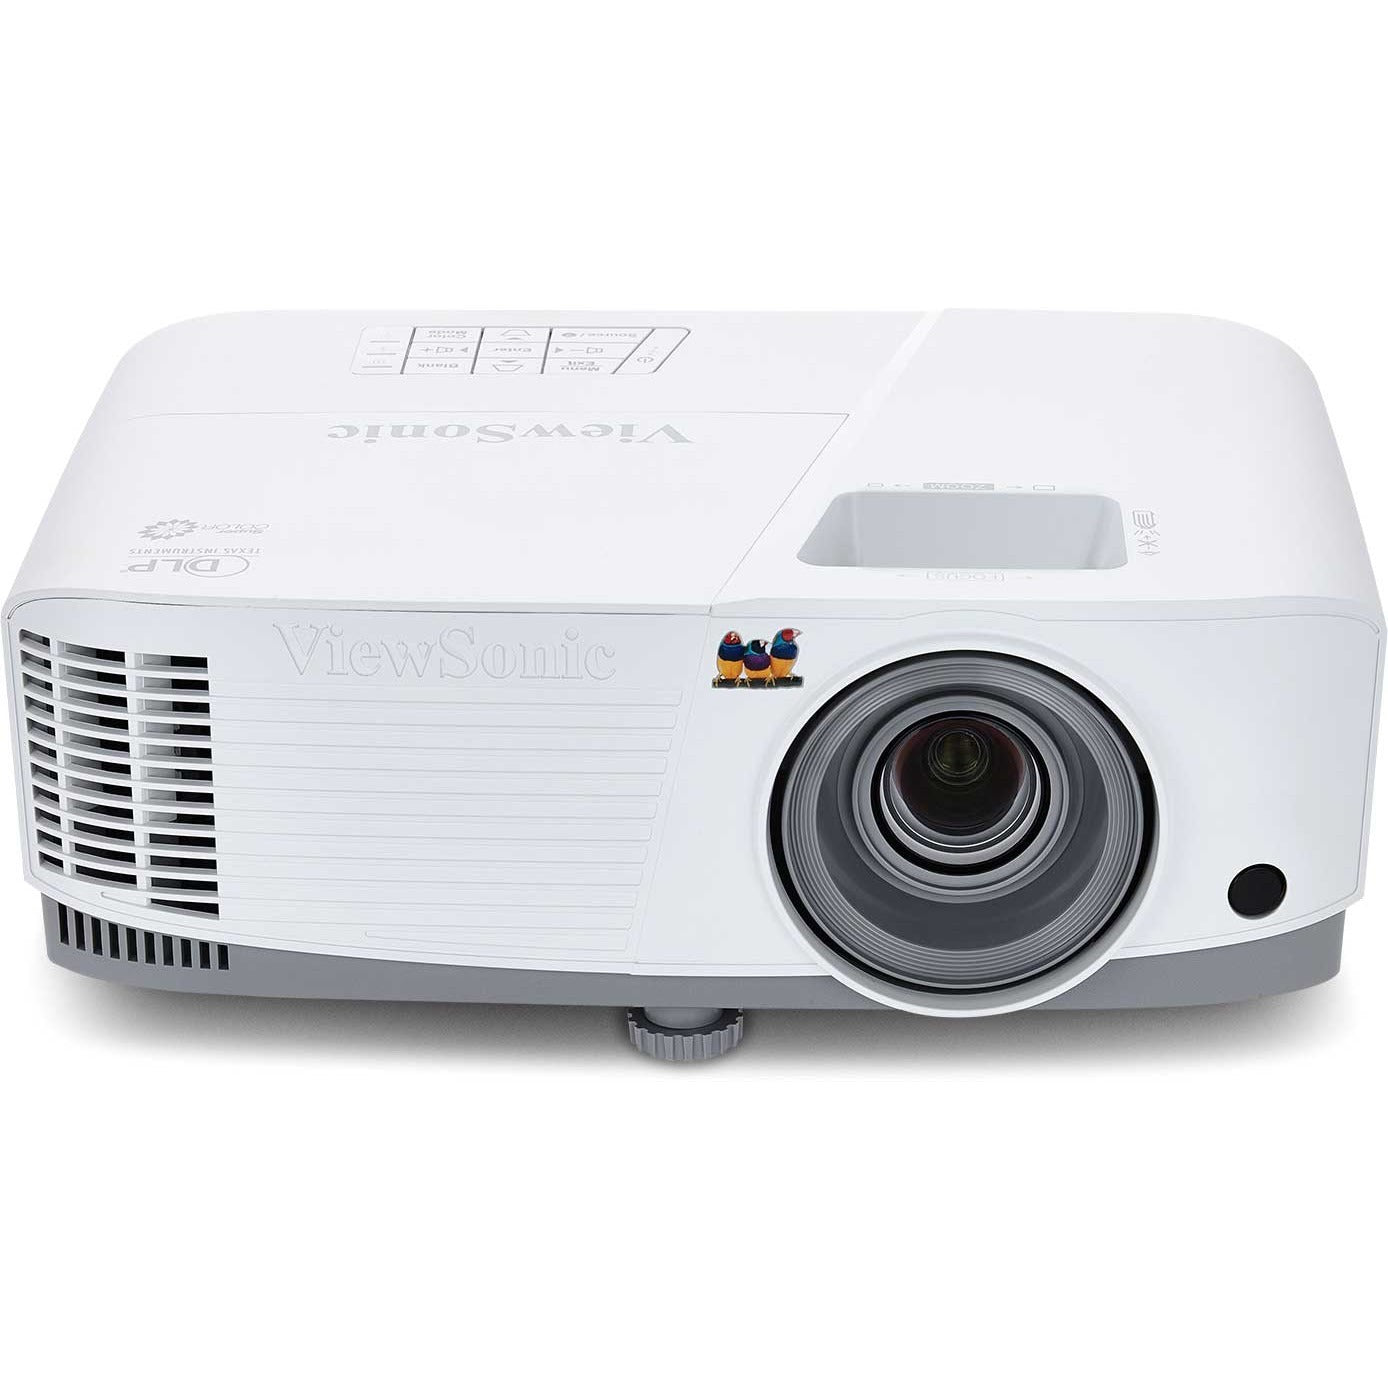 viewsonic-pa503s-3800-lumens-svga-high-brightness-projector-for-home-and-office-with-hdmi-vertical-keystone-pa503s-3800-lumens-svga-high-brightness-projector-with-hdmi-vertical-keystone_vewpa503s - 2